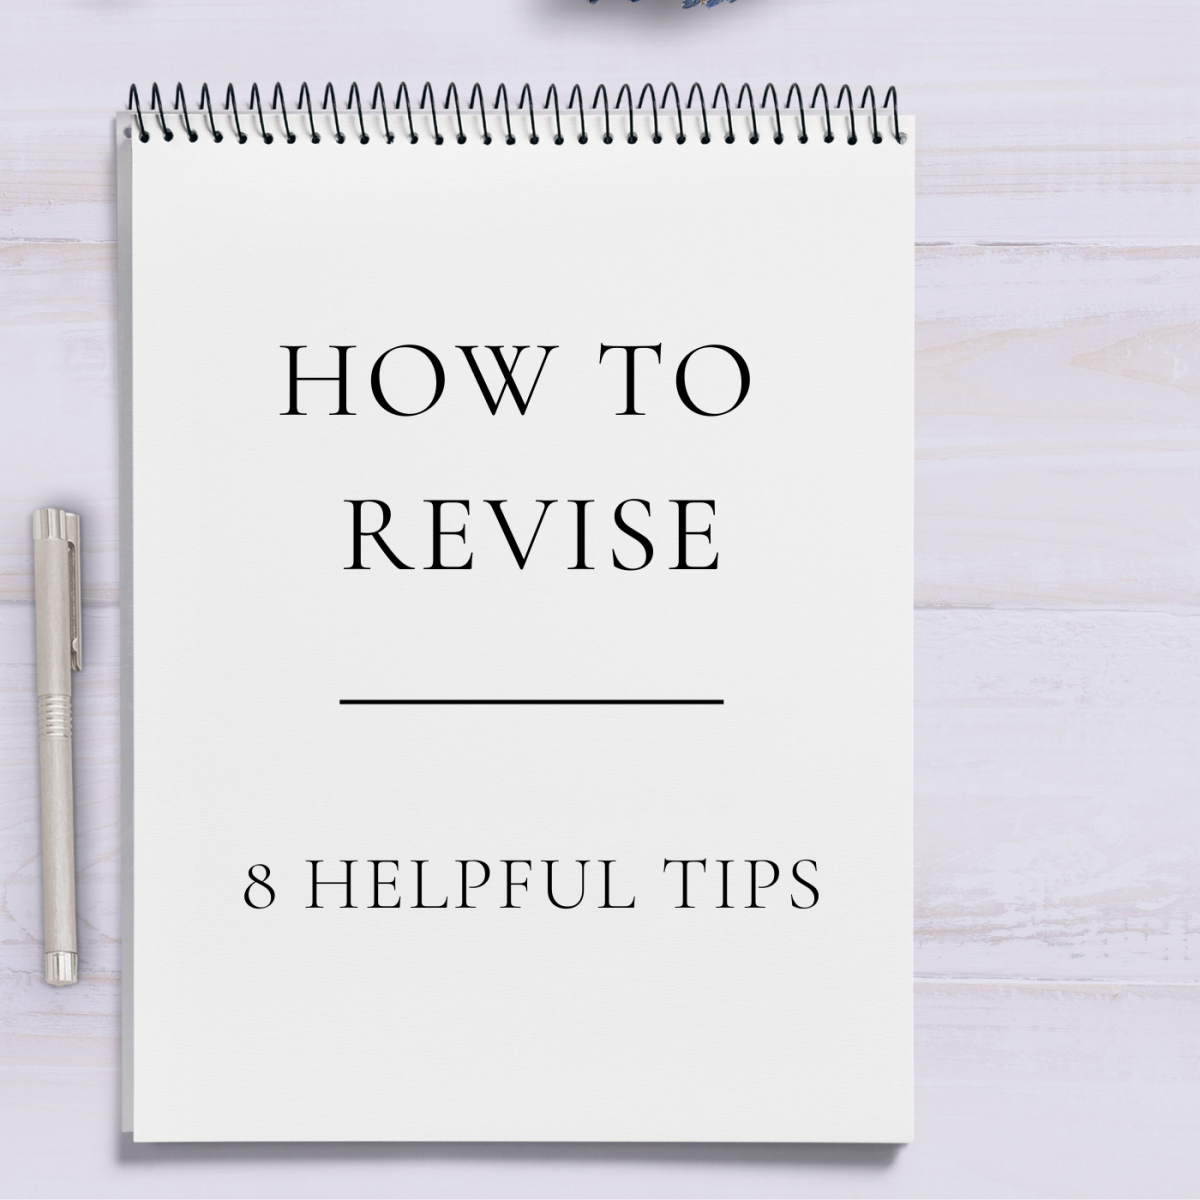 Steps for easy, seamless revisions.